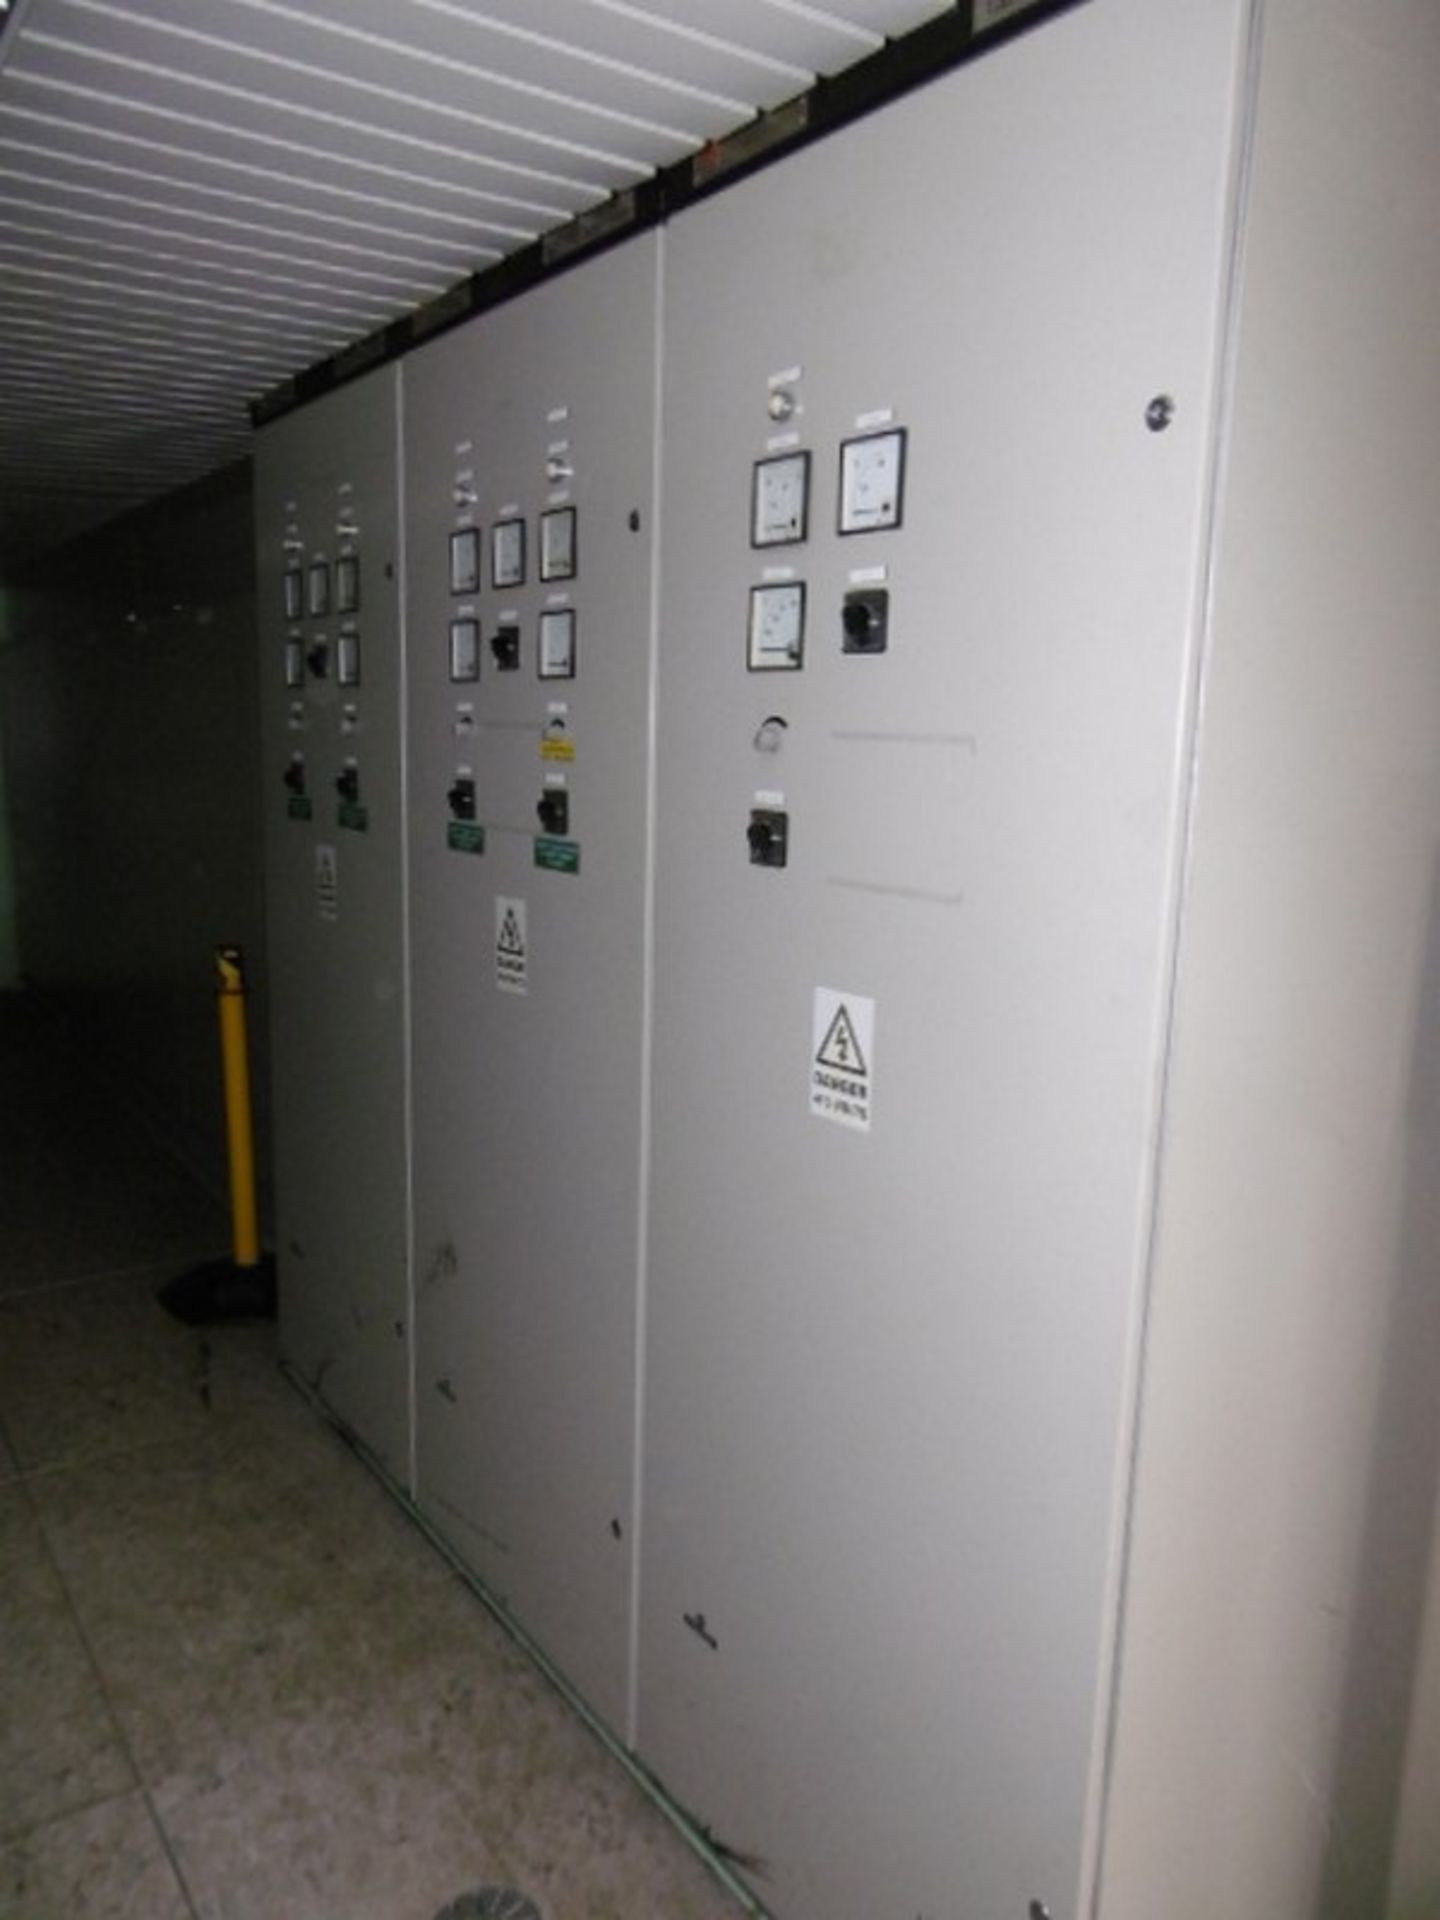 Large Qty Switchgear - From Gas Turbine 2 Control Module Building - Image 12 of 36